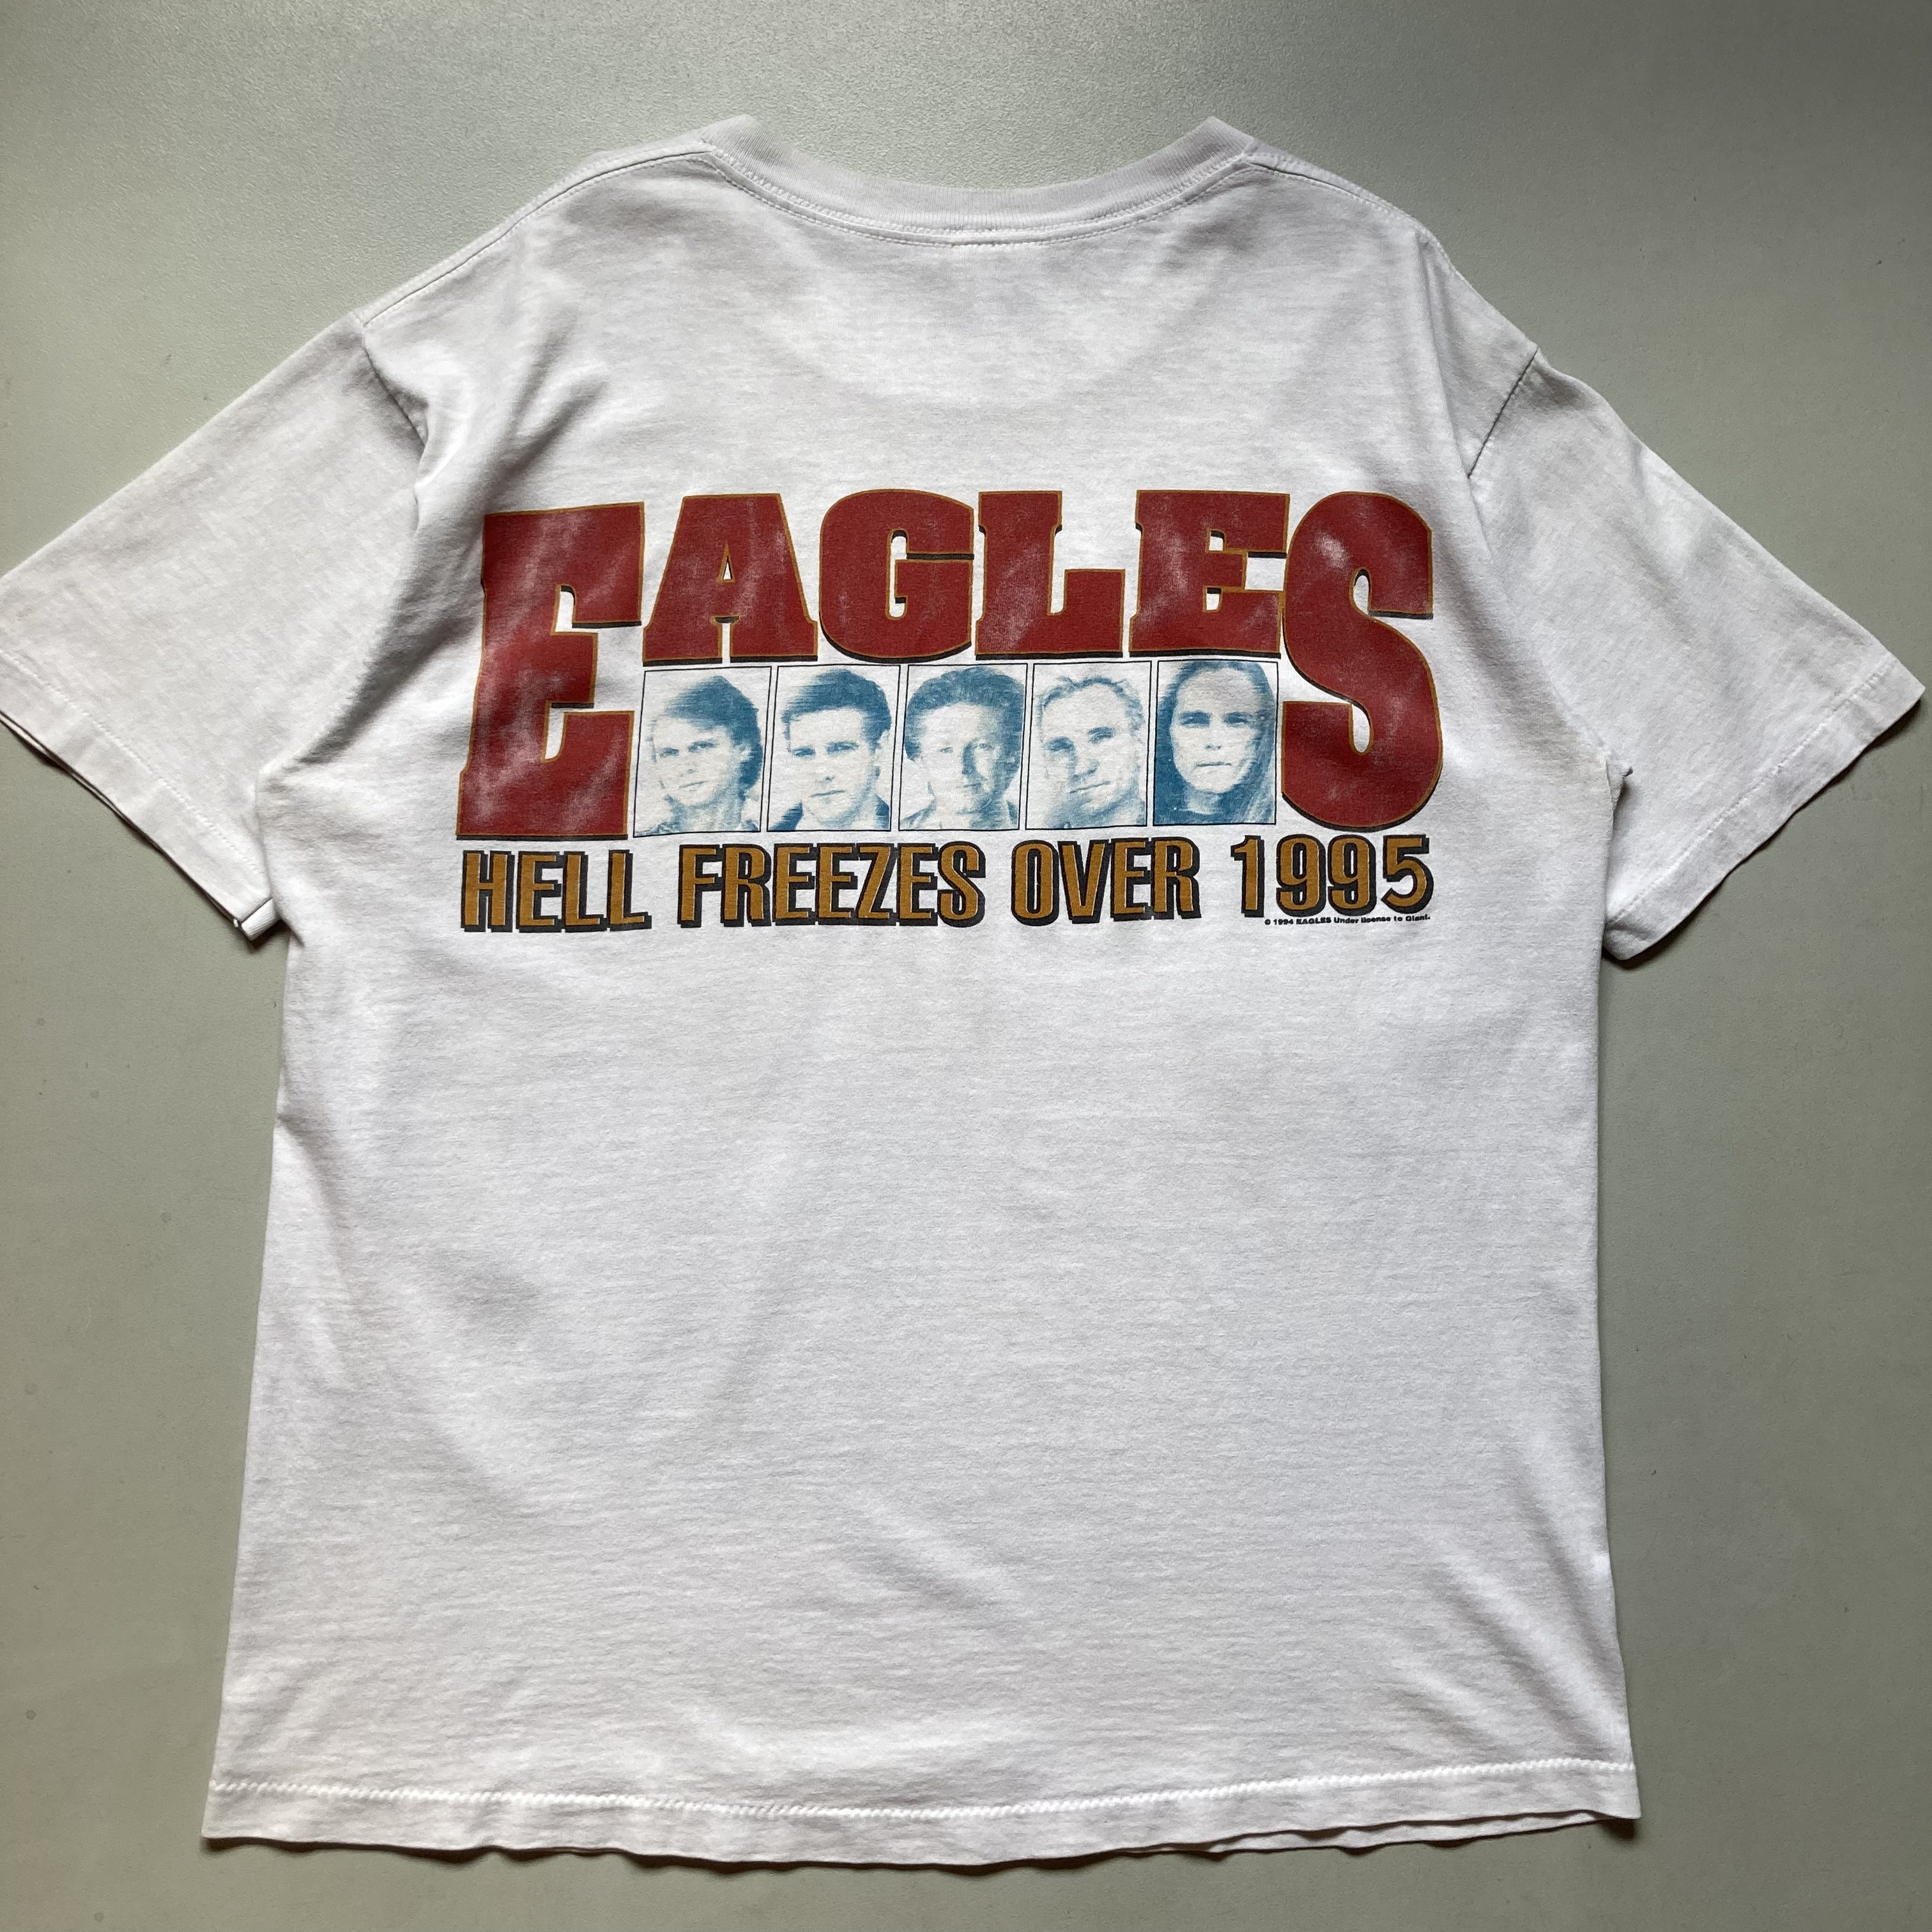 90s eagles band T-shirt 「Hotel California 」 「Hell freeze over ...